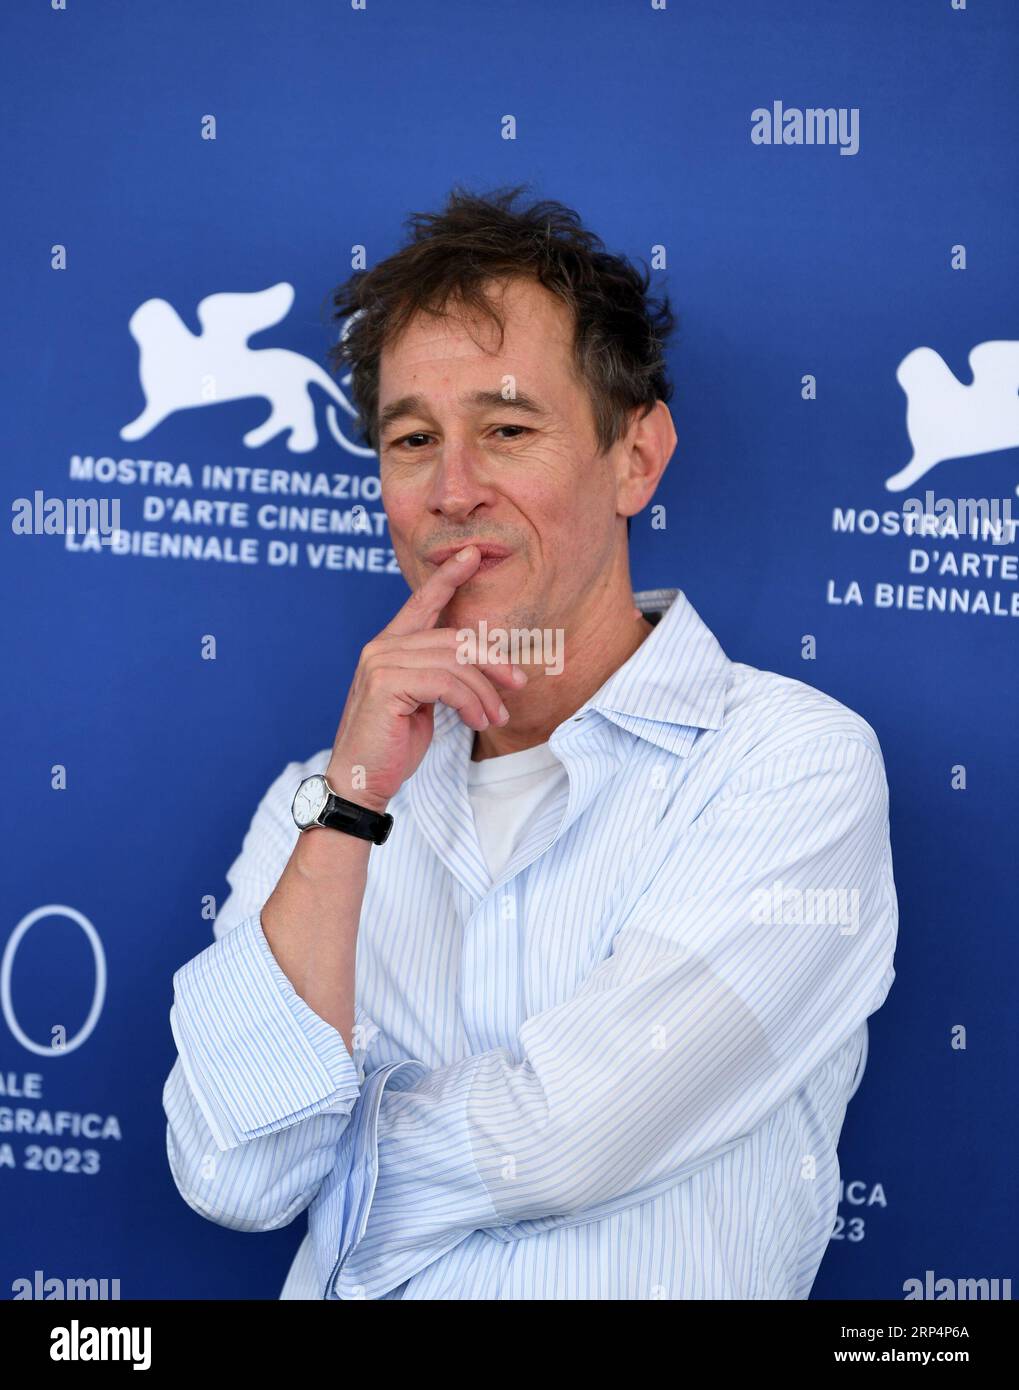 Venice, Italy. 3rd Sep, 2023. Director Bertrand Bonello attends a photocall for the film 'La bete' during the 80th Venice International Film Festival in Venice, Italy, Sept. 3, 2023. Credit: Jin Mamengni/Xinhua/Alamy Live News Stock Photo